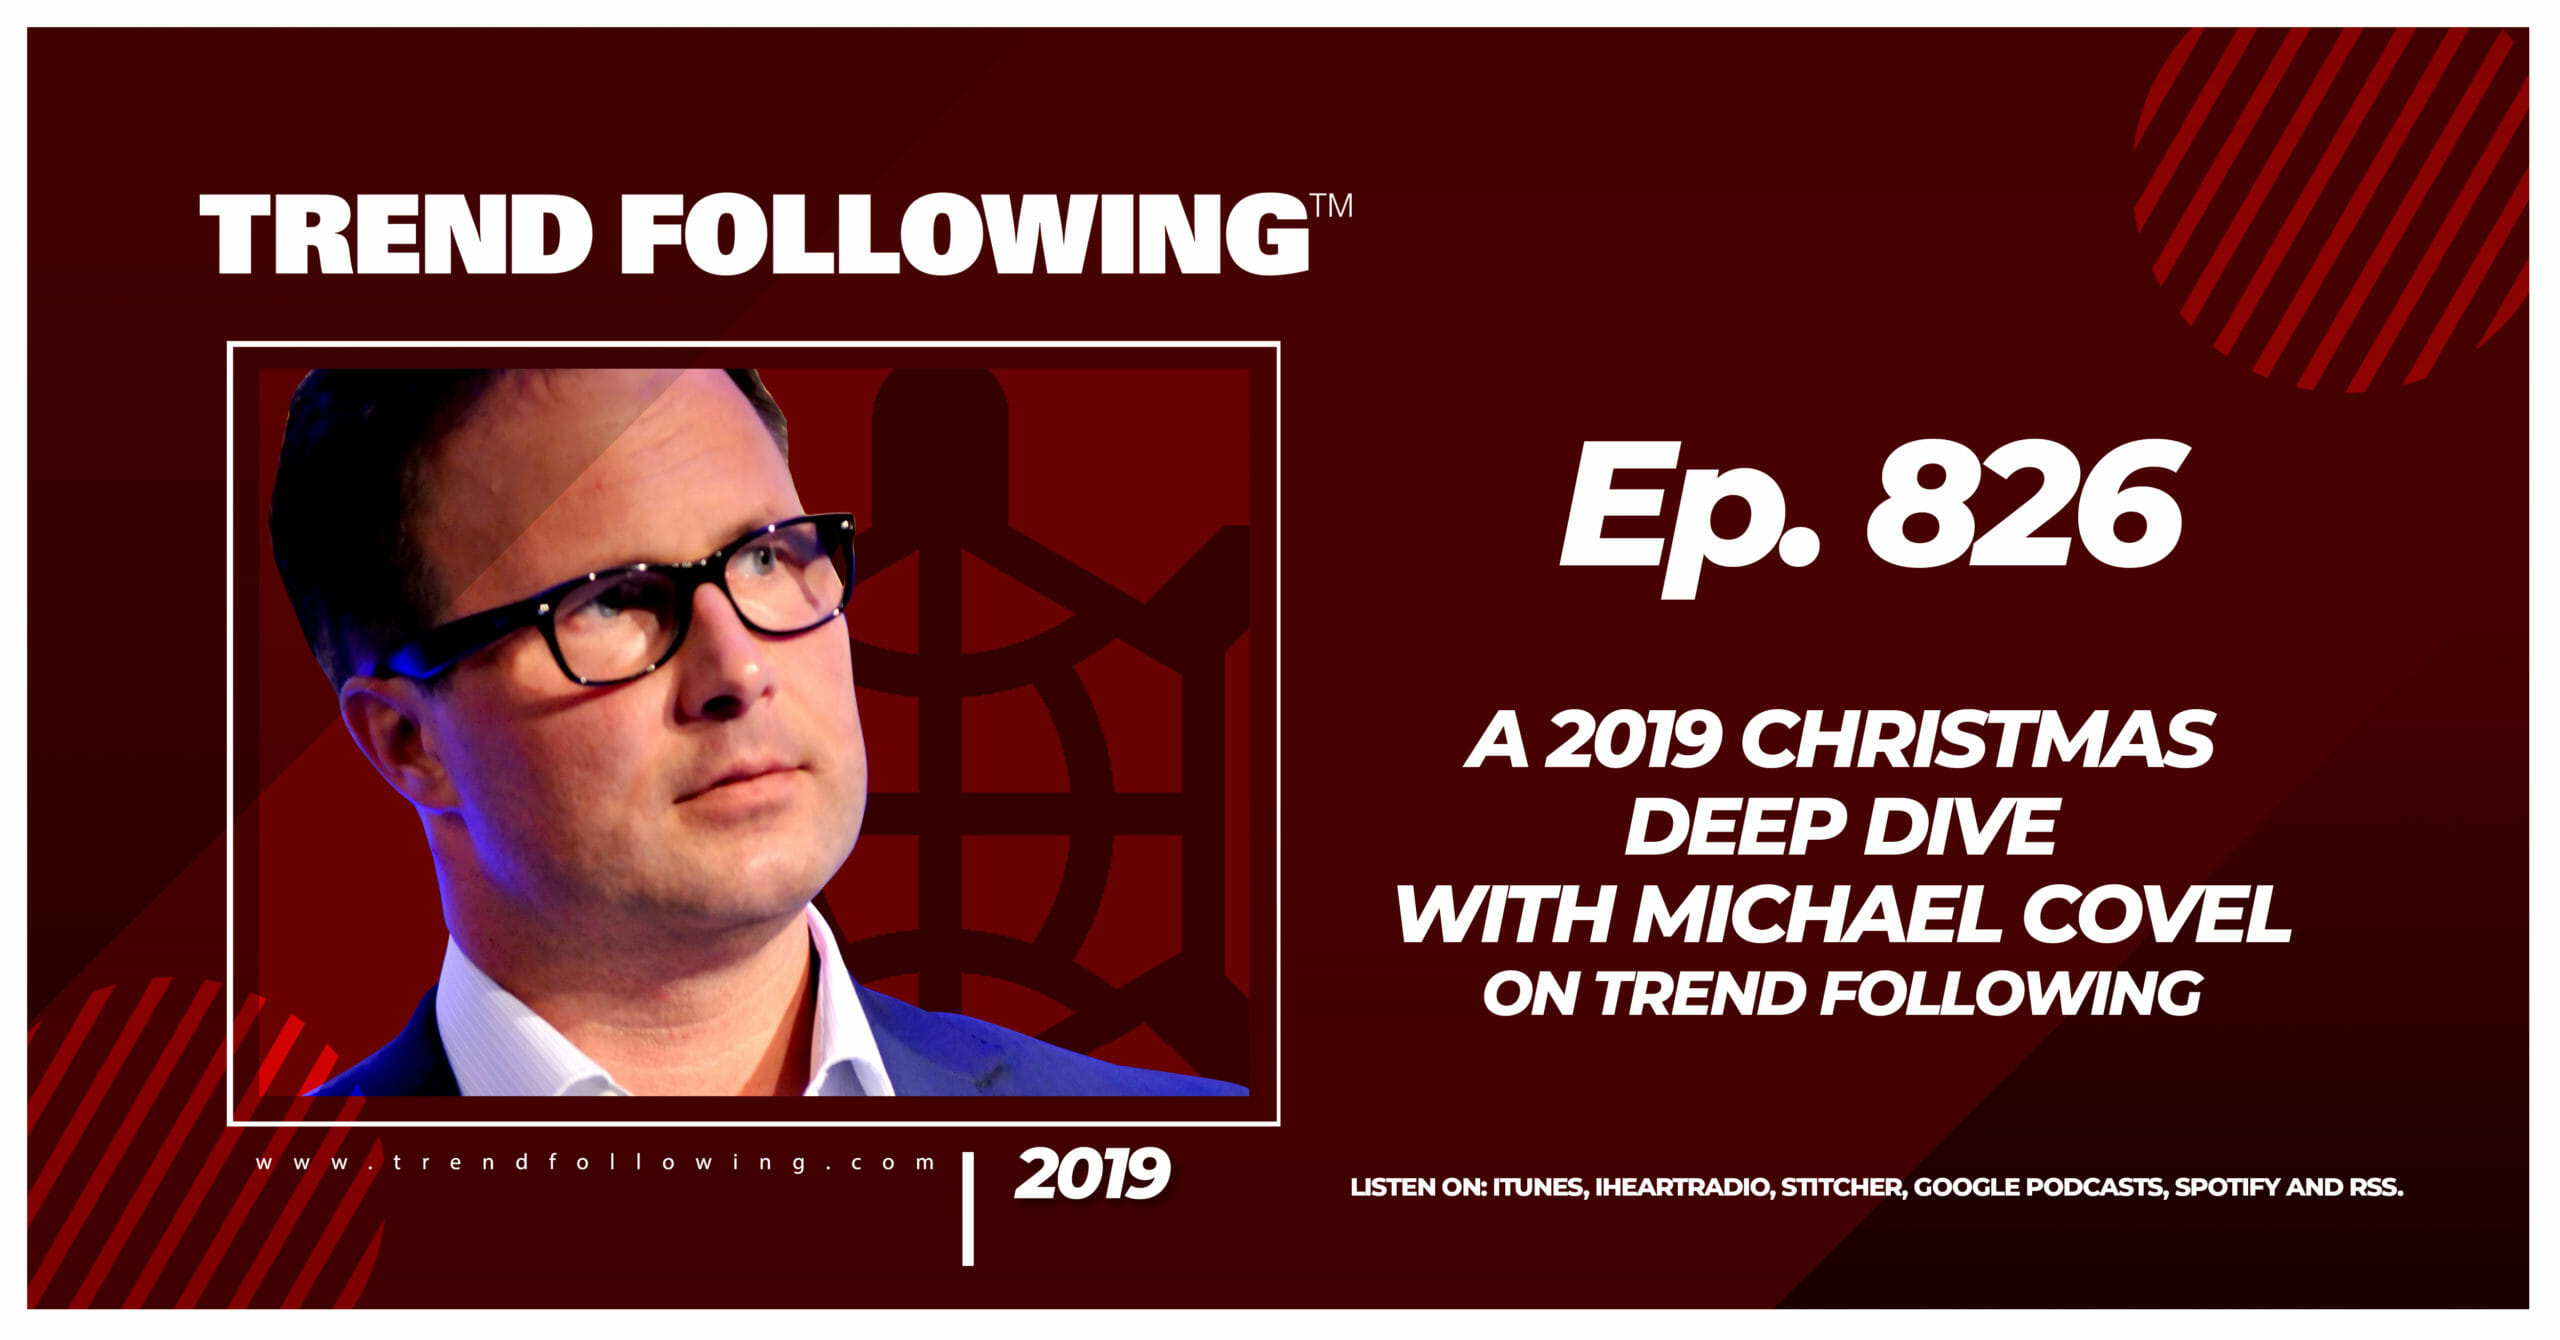 A 2019 Christmas Deep Dive with Michael Covel